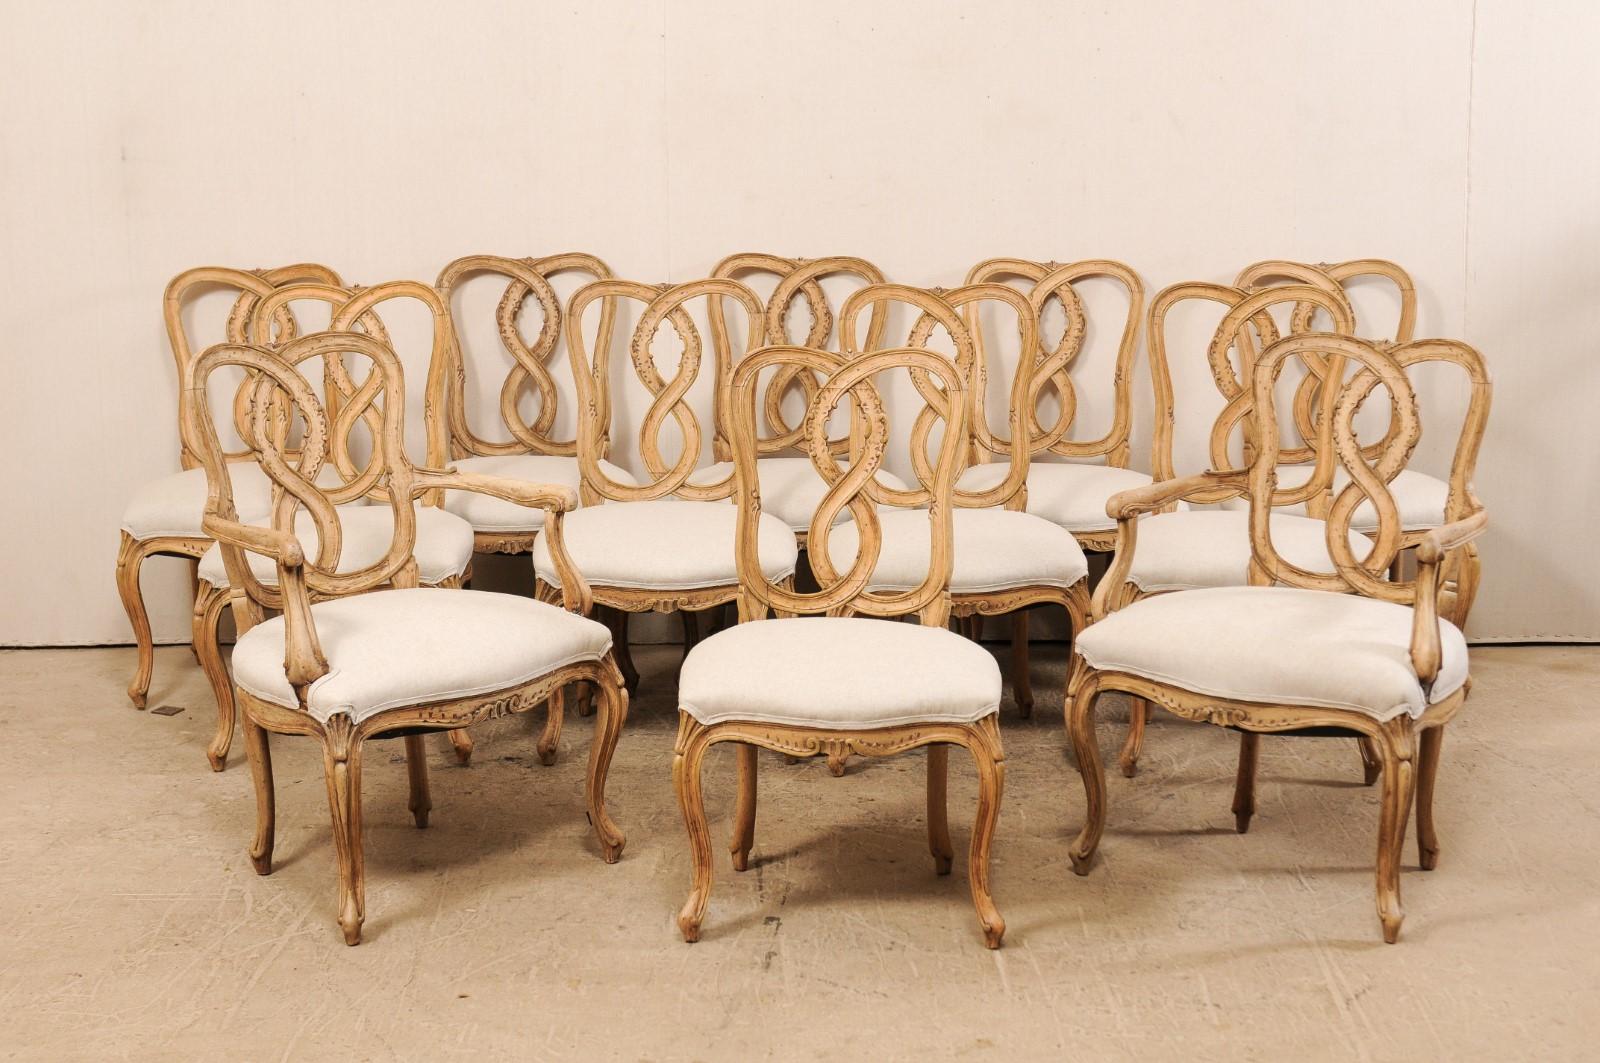 Set of twelve American made, Italian Venetian style carved wood chairs with upholstered seats from the mid-20th century. This vintage set of chairs, consisting of a pair of arm chairs and ten side chairs, feature a twisted and pierced ribbon